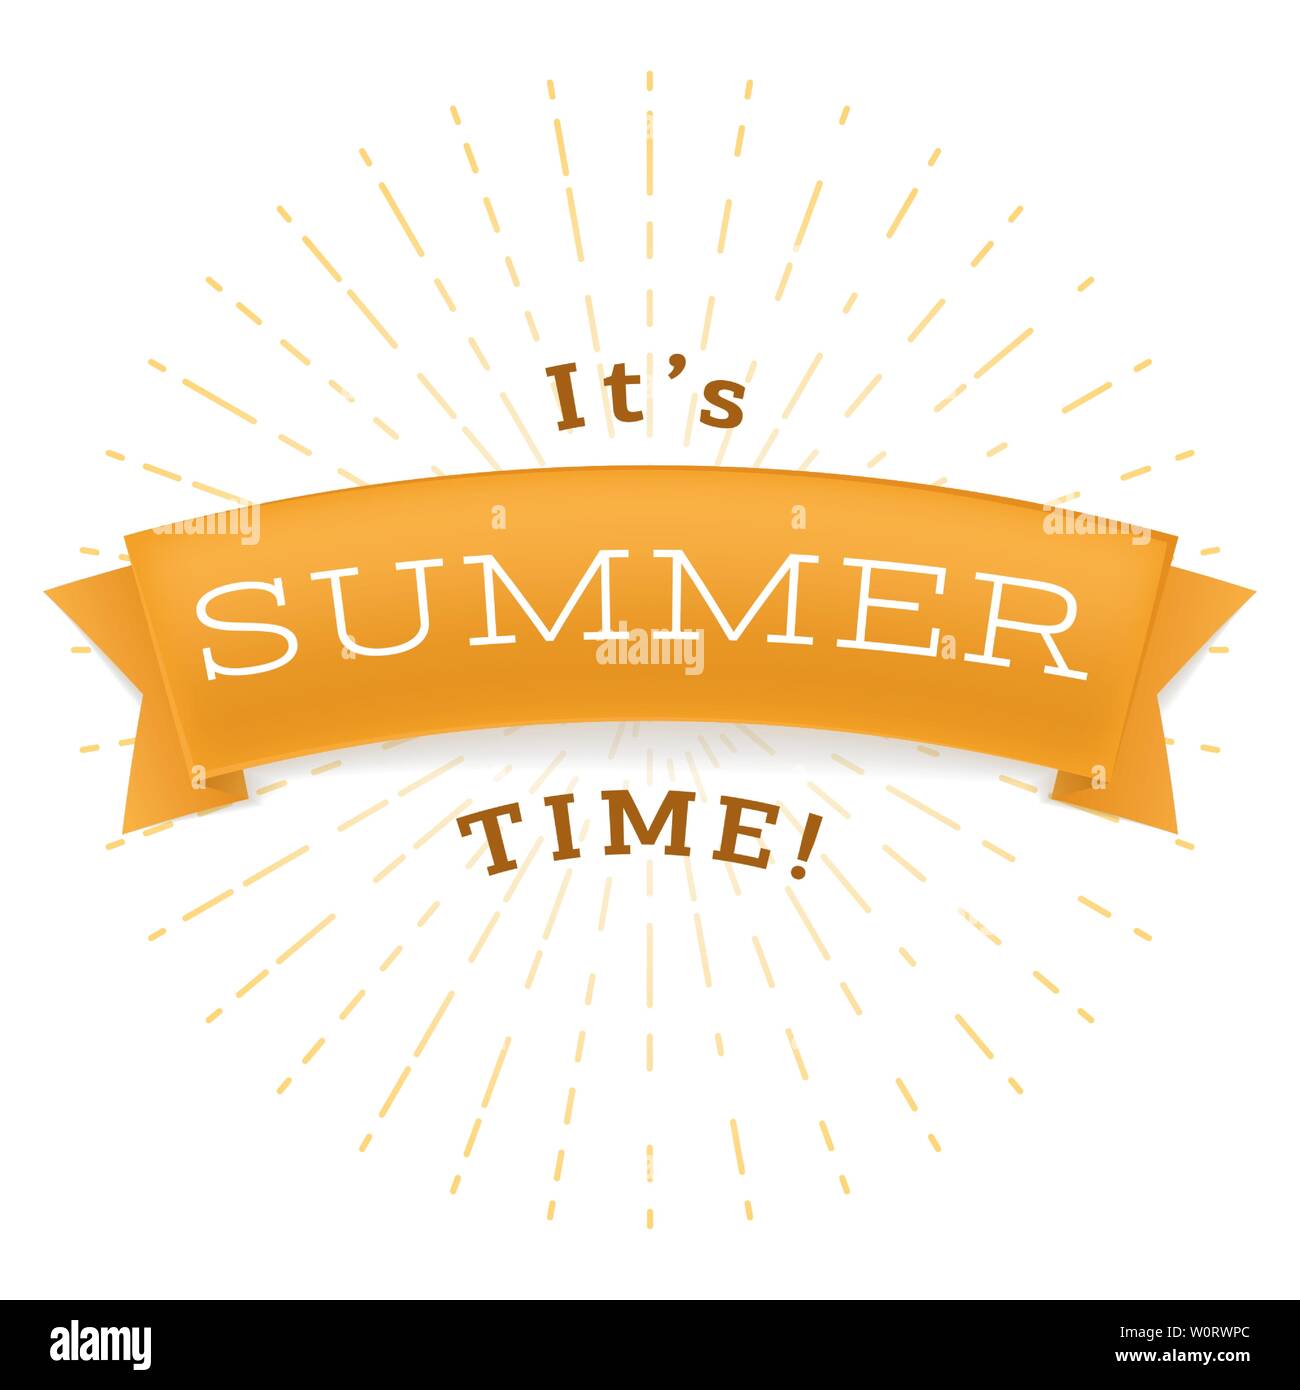 Summertime relax flat vector banner template. It is summer time phrase on golden ribbon, warm season relax inscription. Positive message for social media post with stylized sun rays in round frame Stock Vector